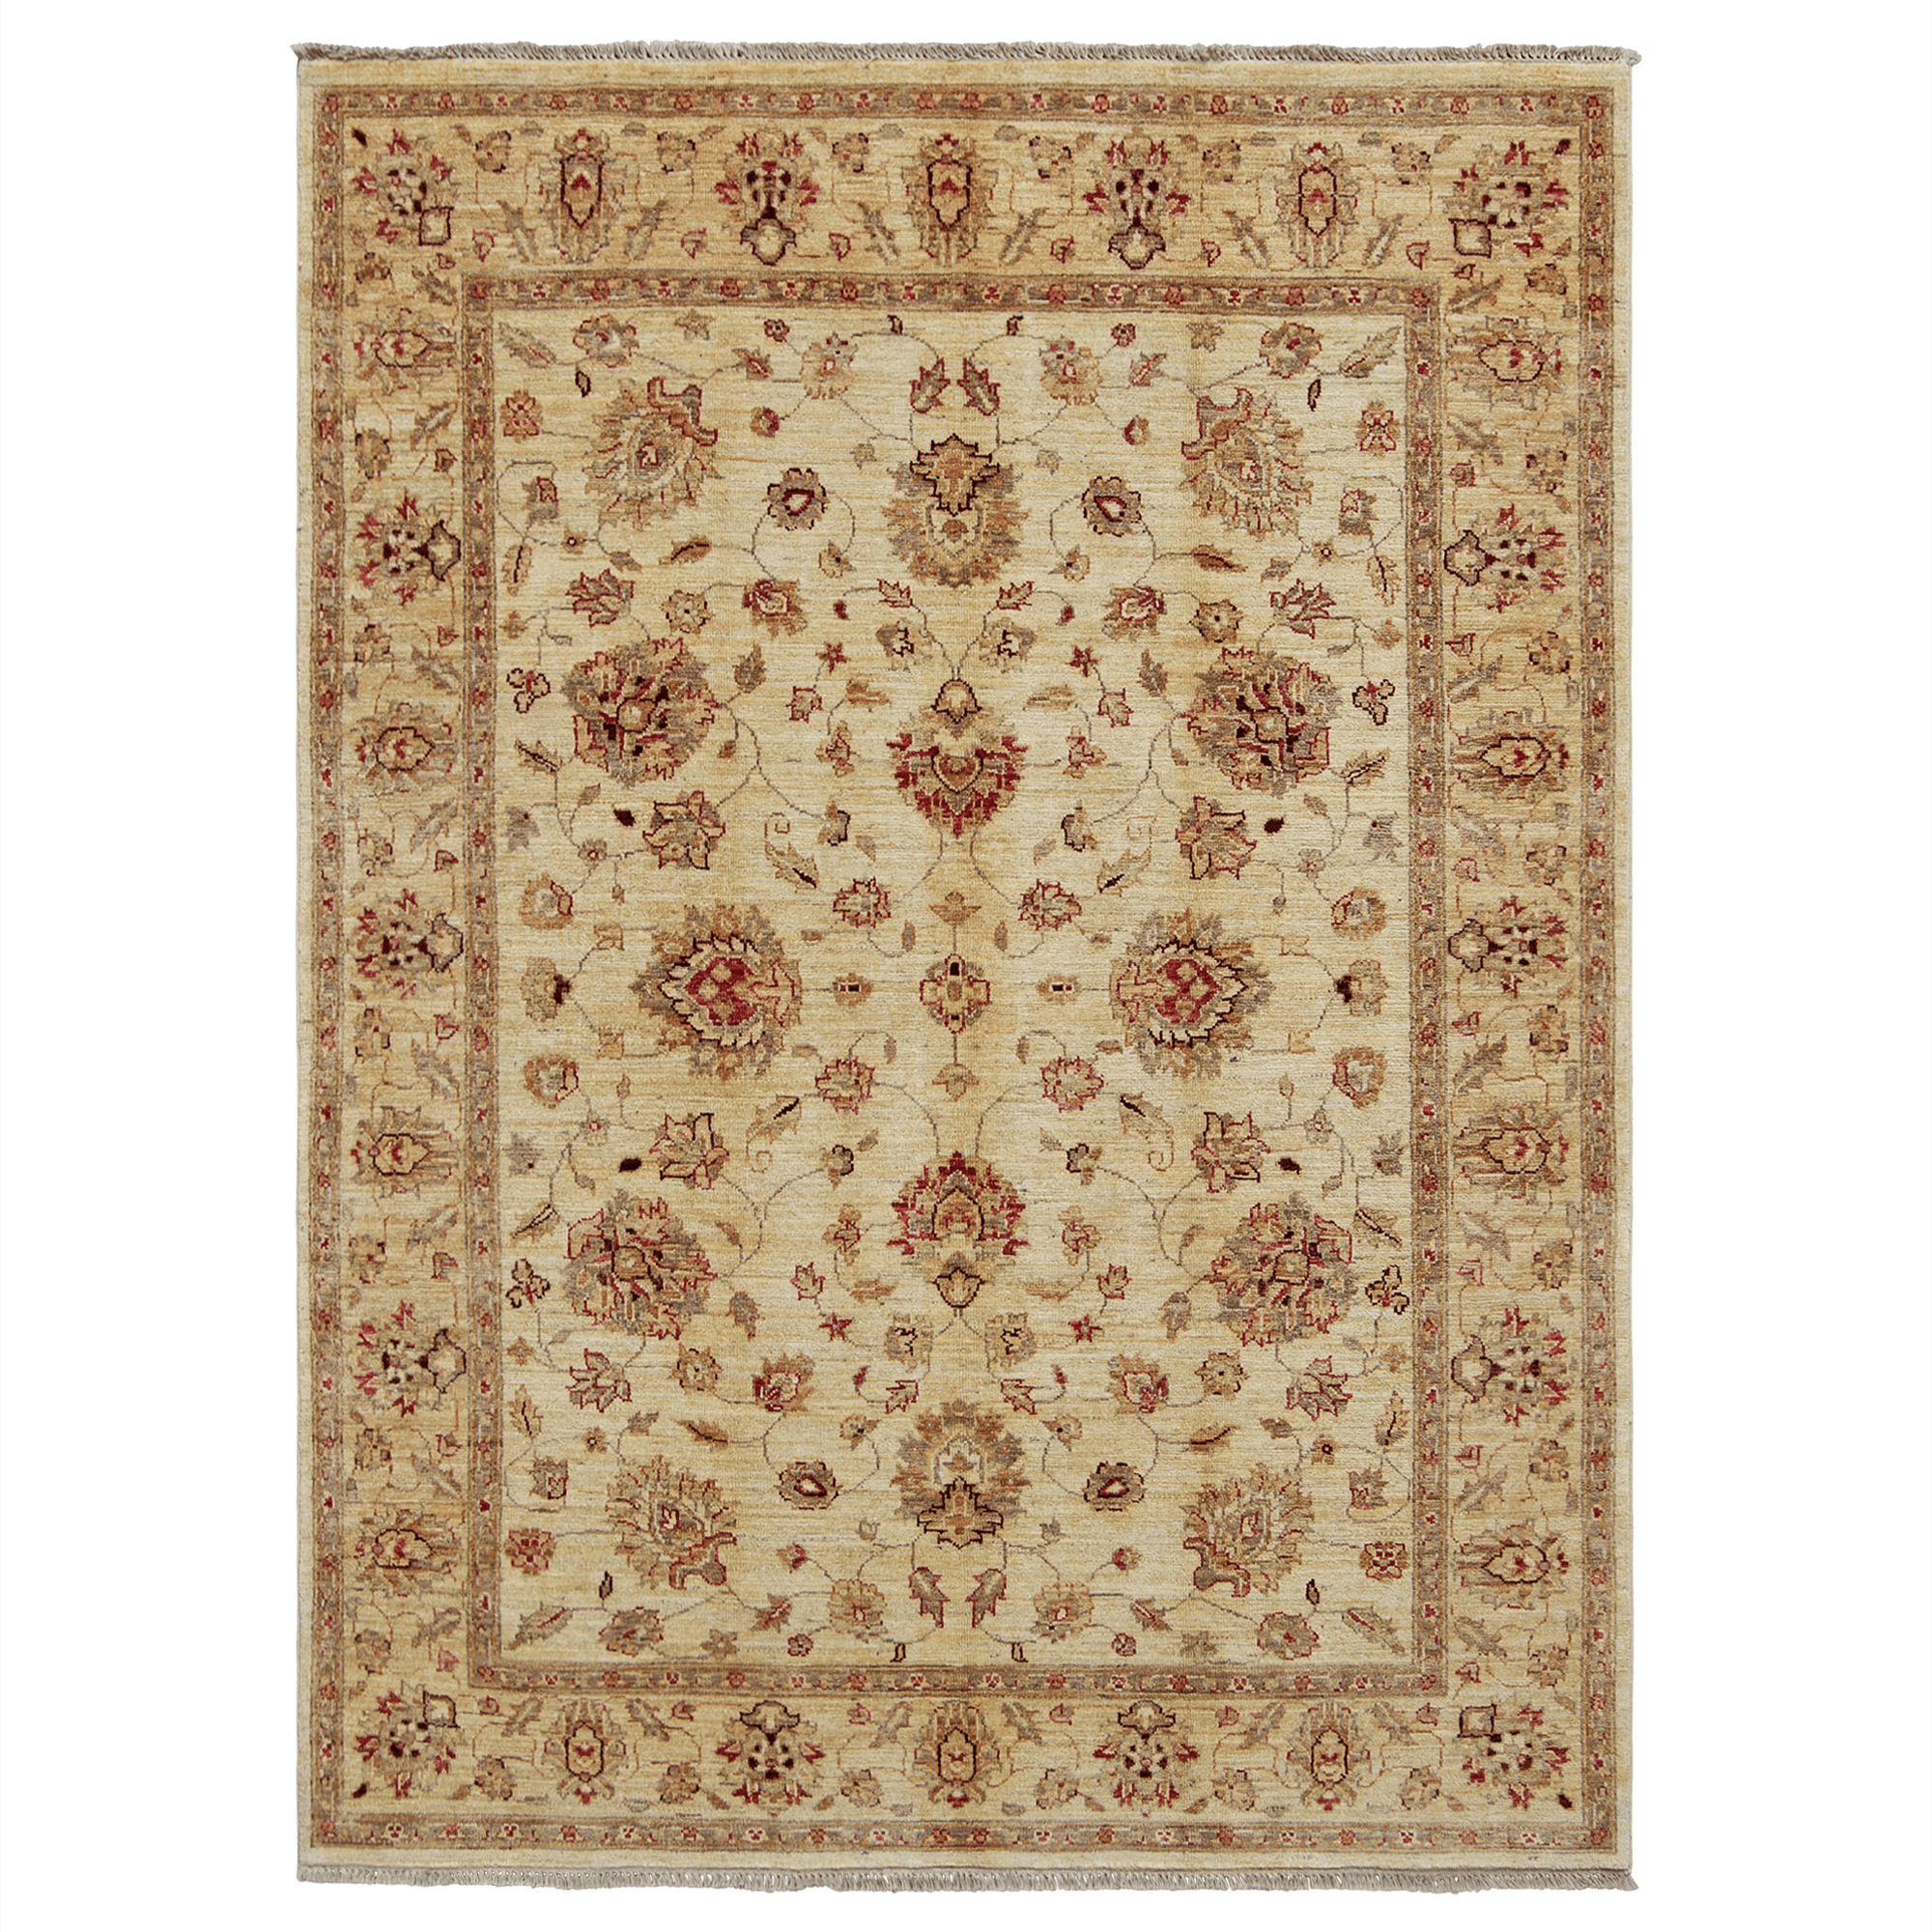 Fine Hand-knotted Ziegler Himalayan Wool Rug 147cm x 191cm